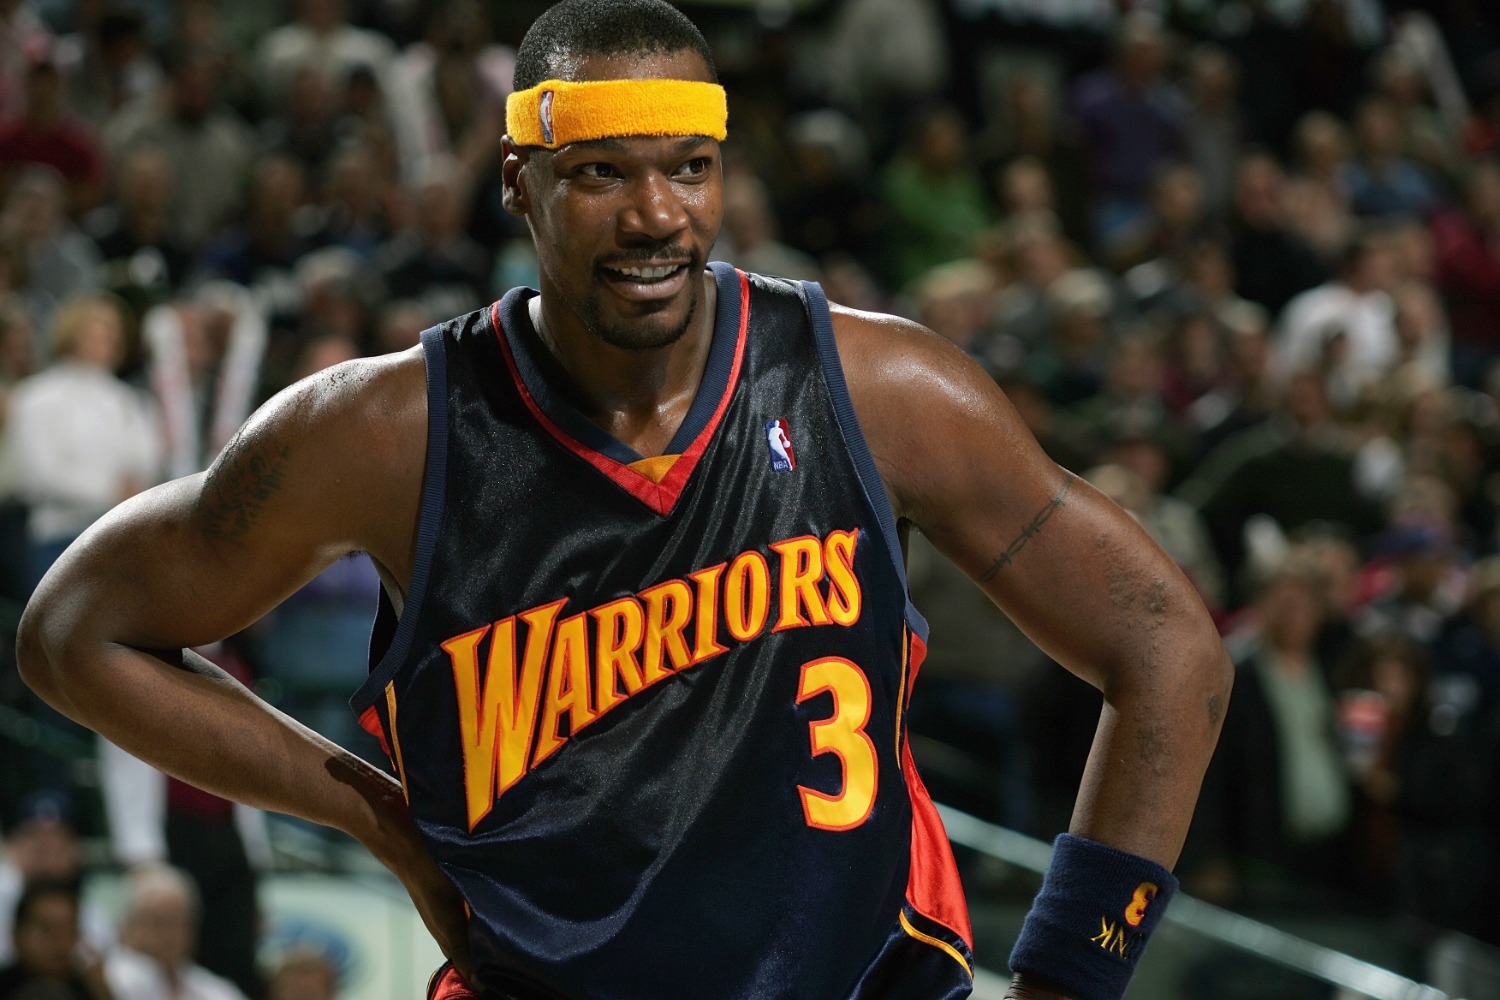 Cliff Robinson built an impressive net worth as a big-time NBA star before he died at the age of 53.